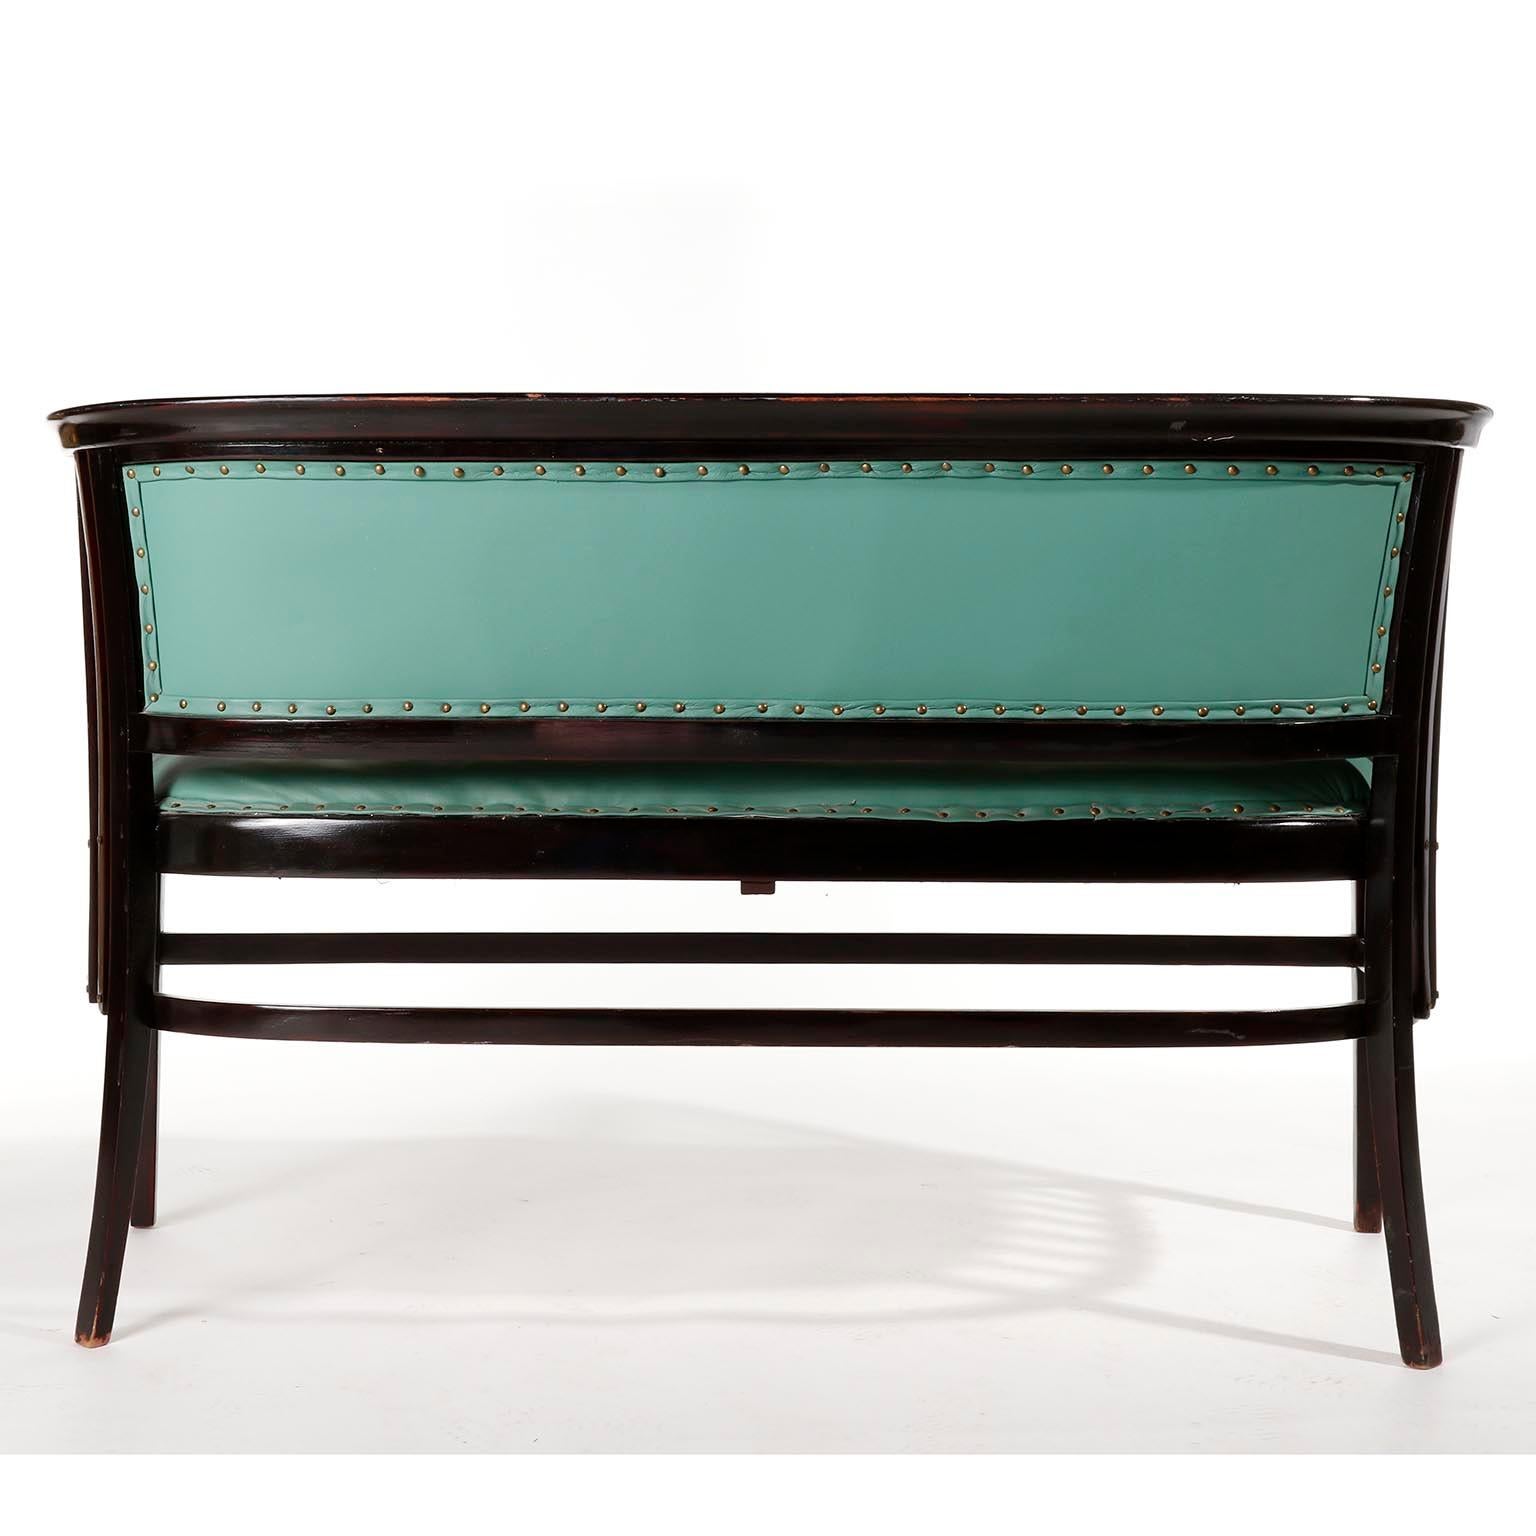 Stained Marcel Kammerer Settee Bench Seat, Thonet Austria, Turquoise Green Leather, 1910 For Sale